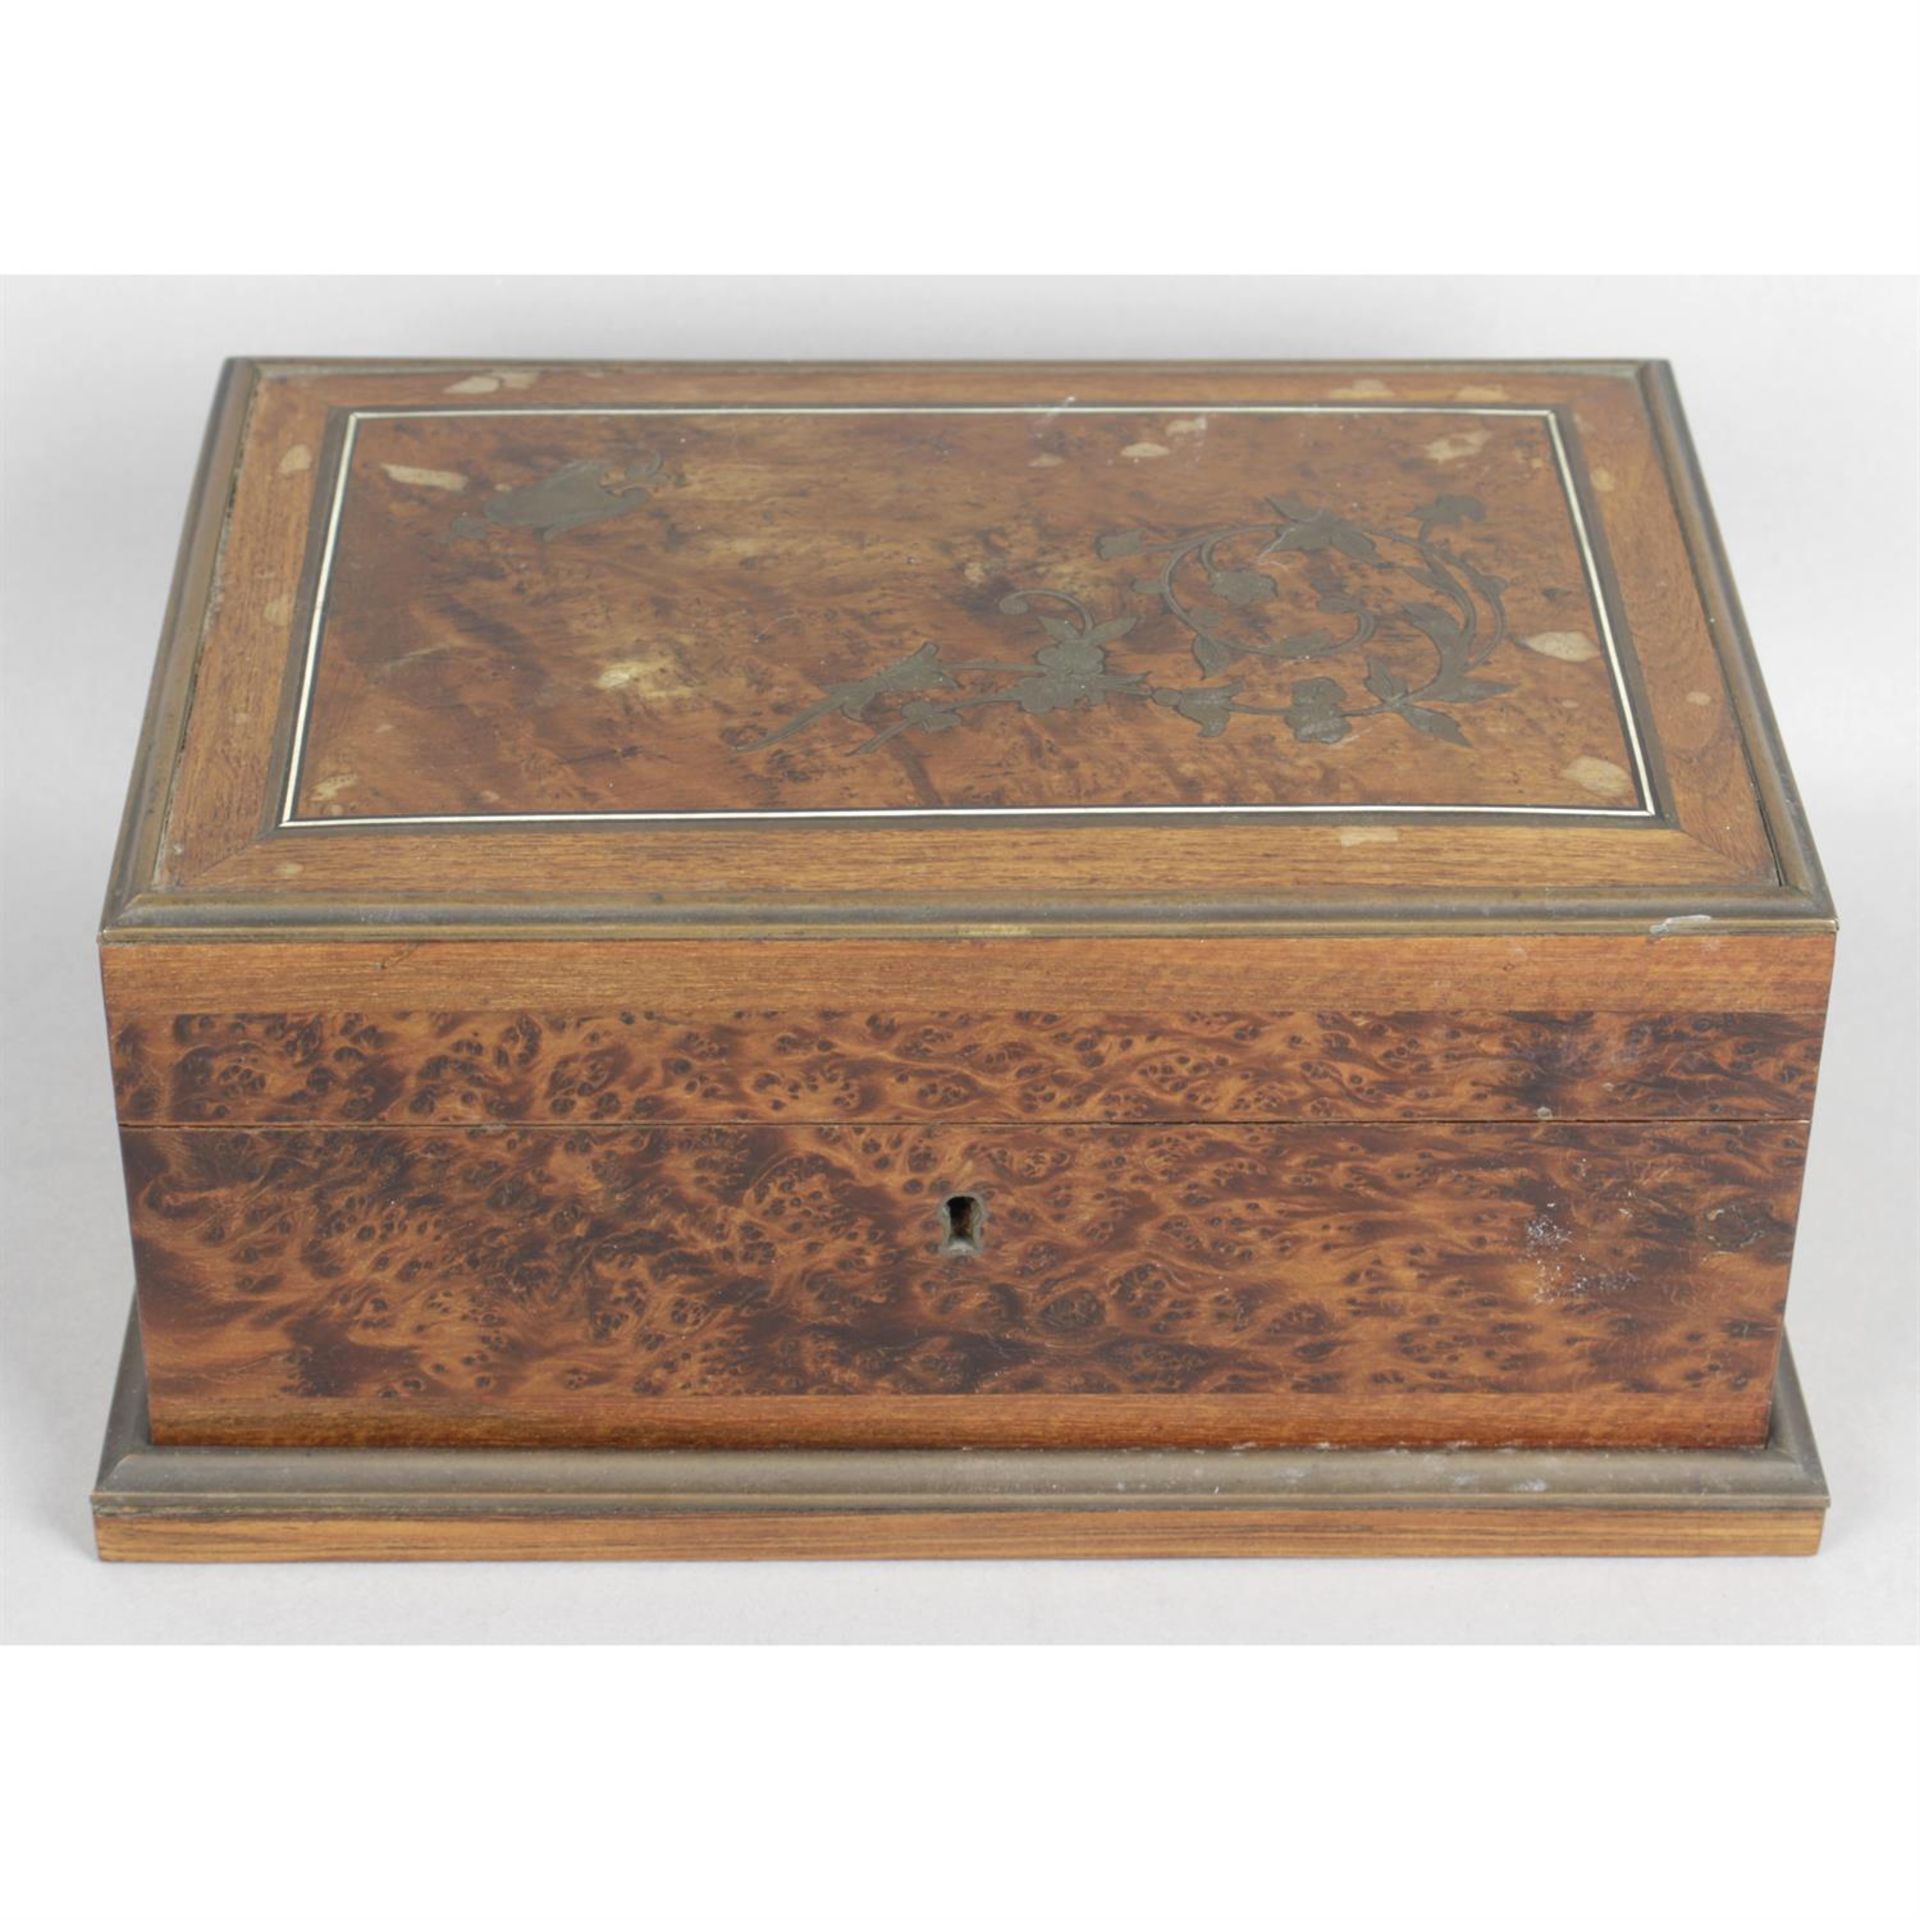 An early 20th century brass inlaid and burr wood ladies dressing table box.